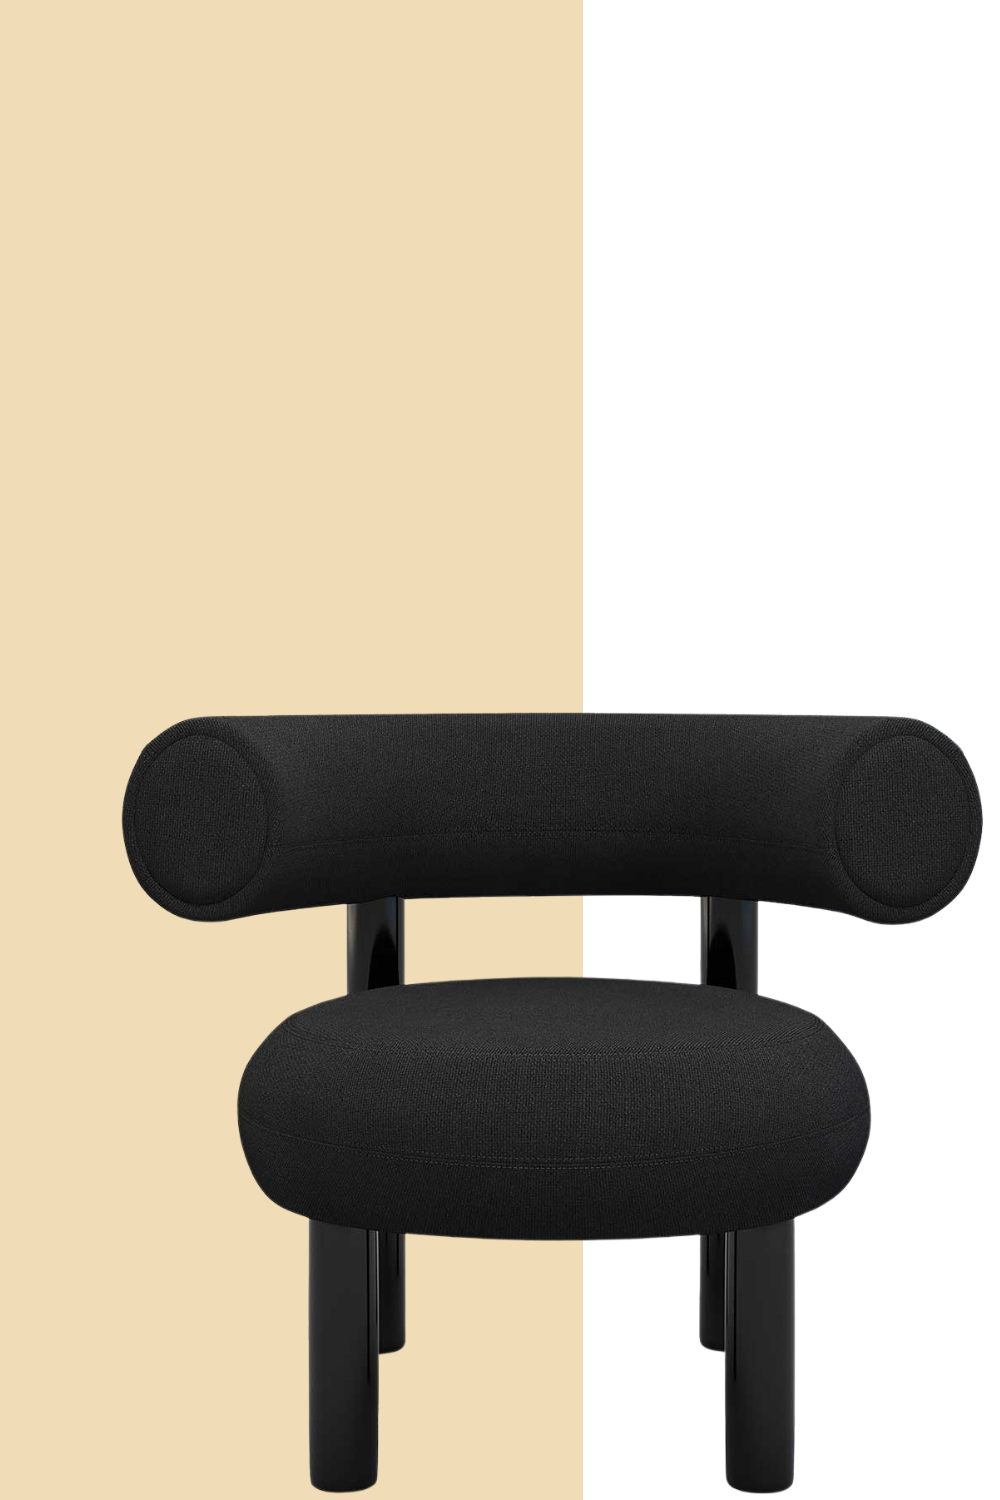 lounge chair with upholstered woolen fabric on glossy black lacquer finish legs